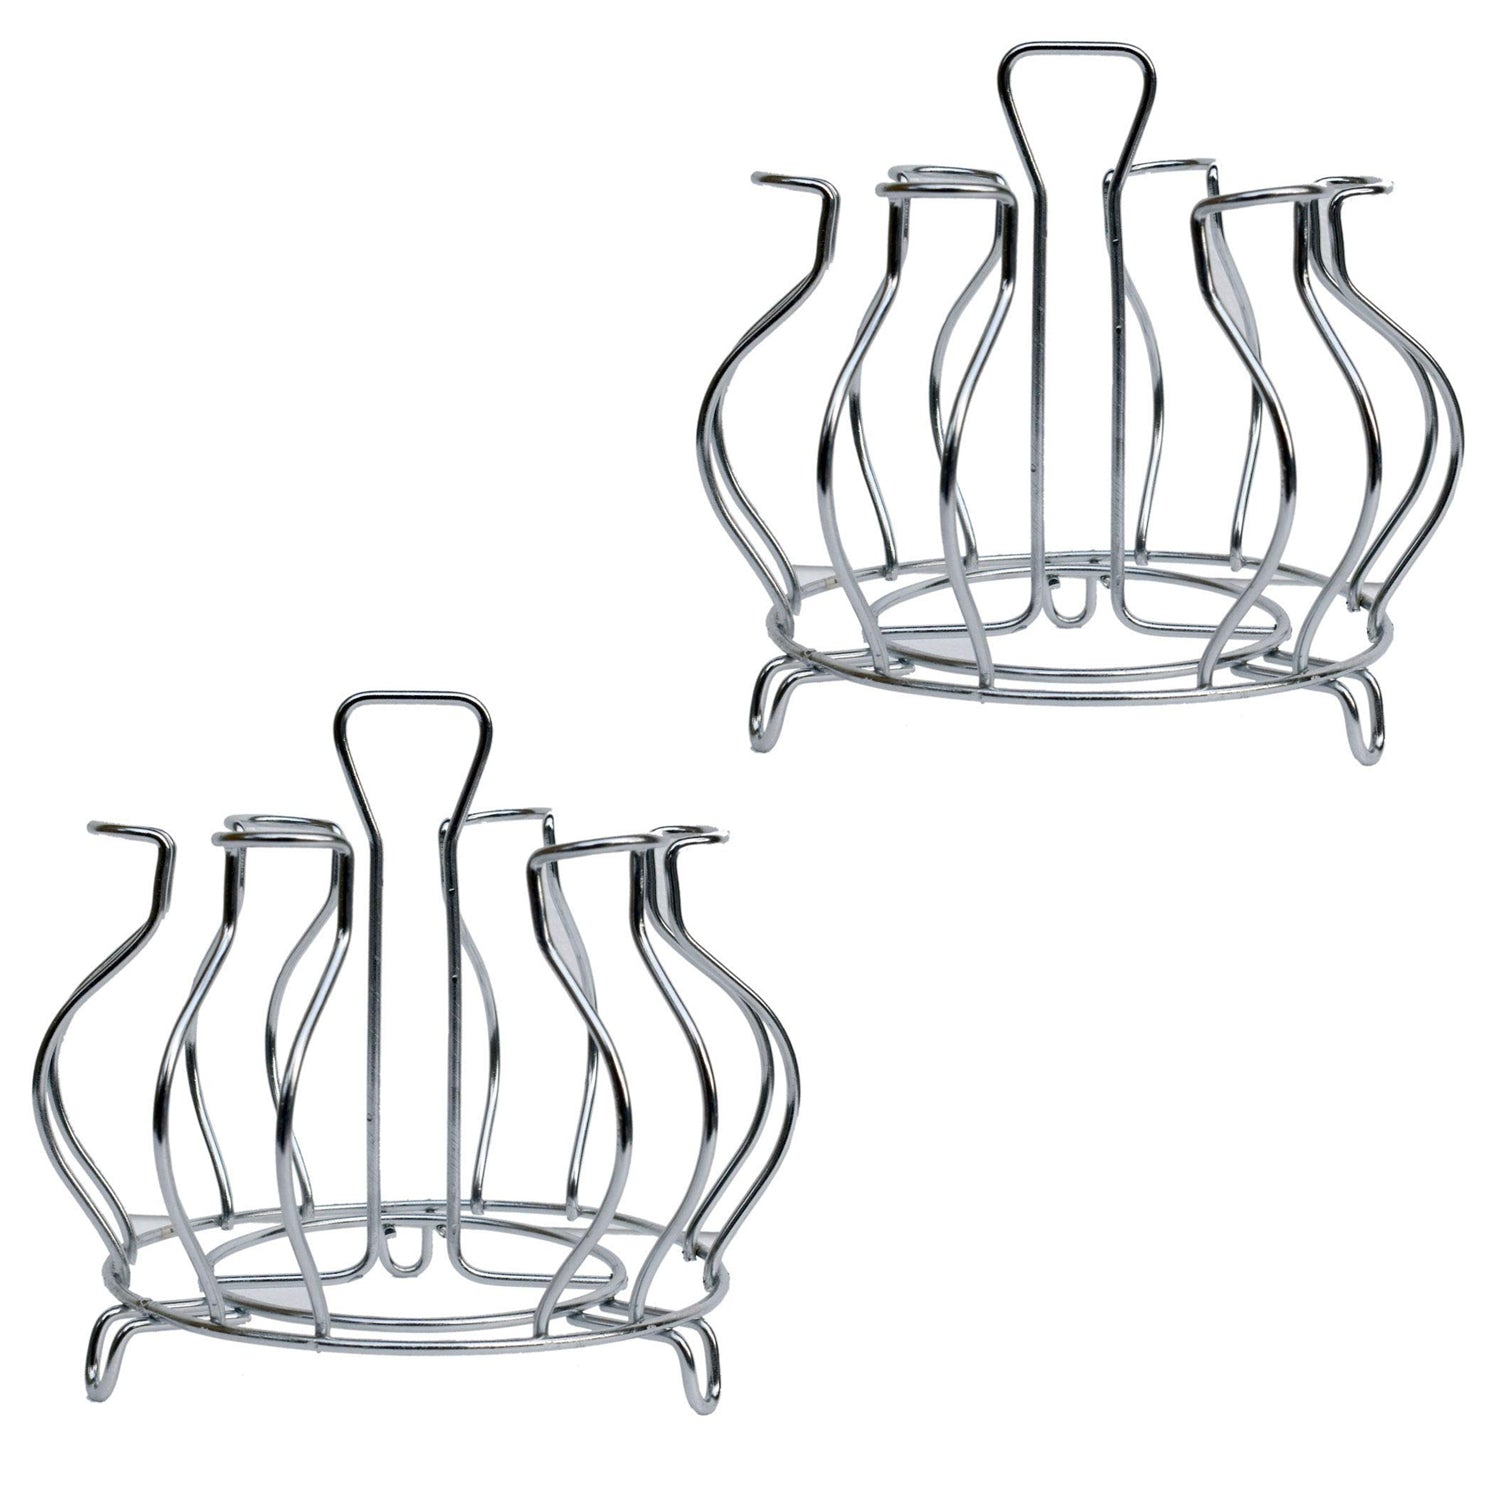 2134 Stainless Steel Glass Holder Glass Hanging Organizer for Kitchen Bars Pubs DeoDap